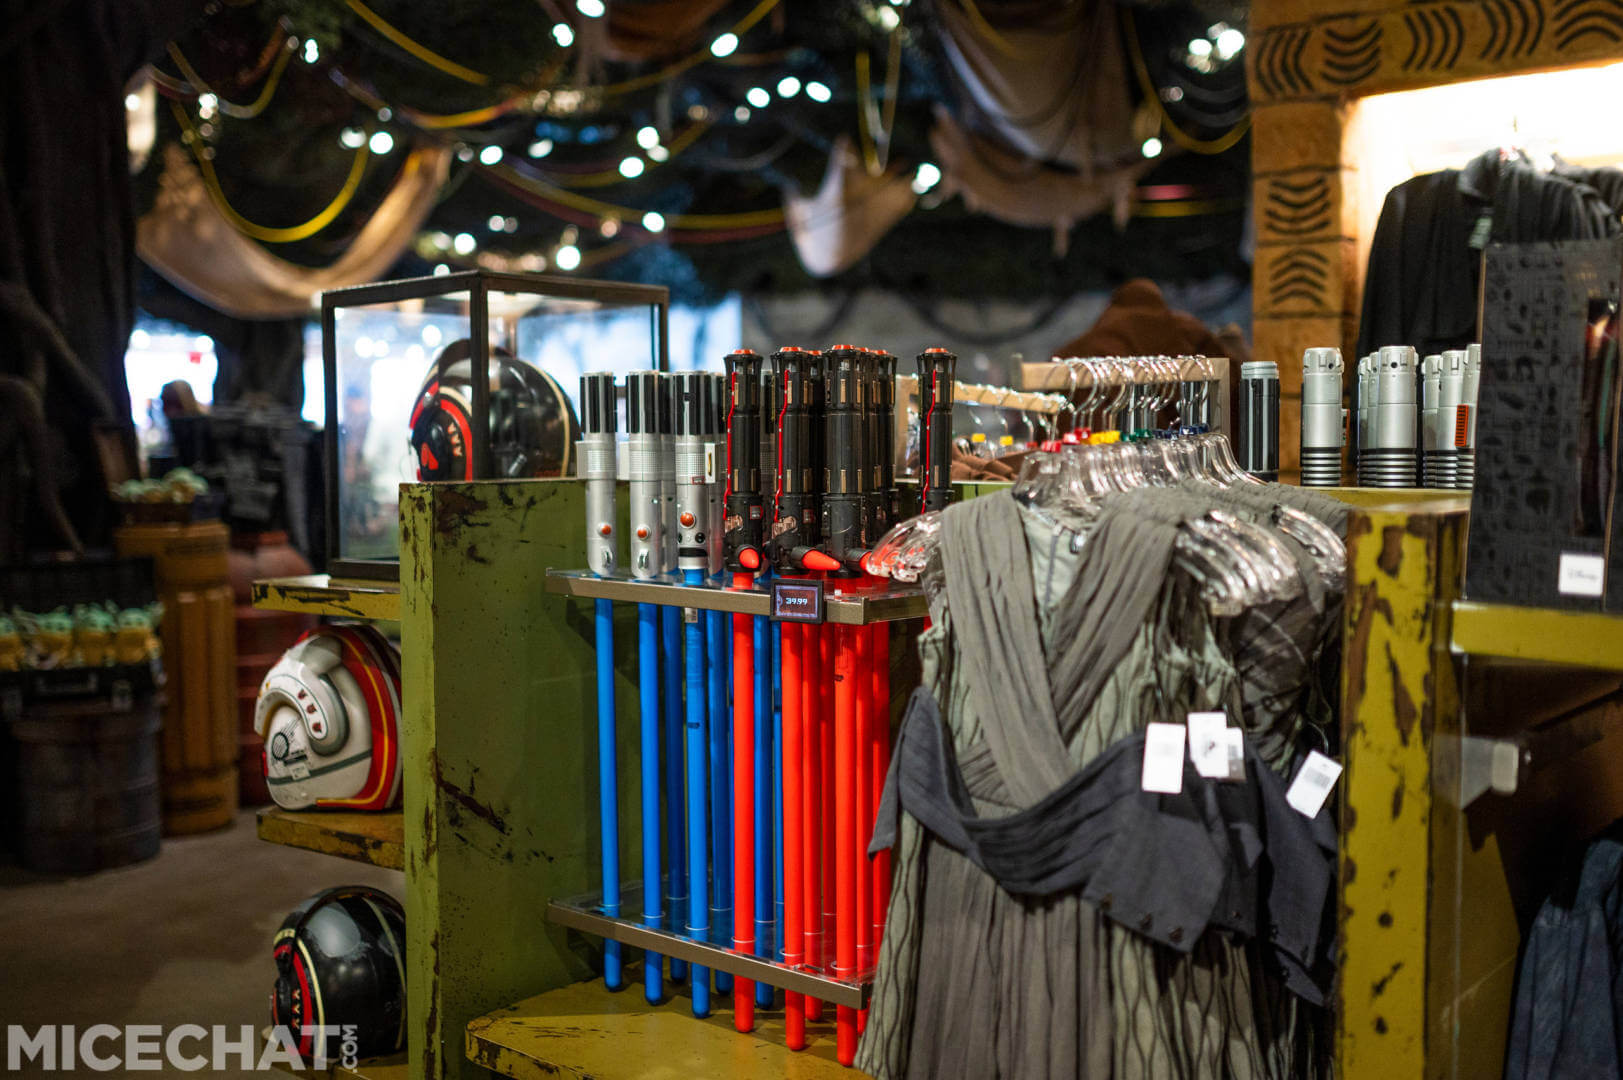 , FIRST LOOK Inside the NEW Star Wars Trading Post in Downtown Disney Anaheim!